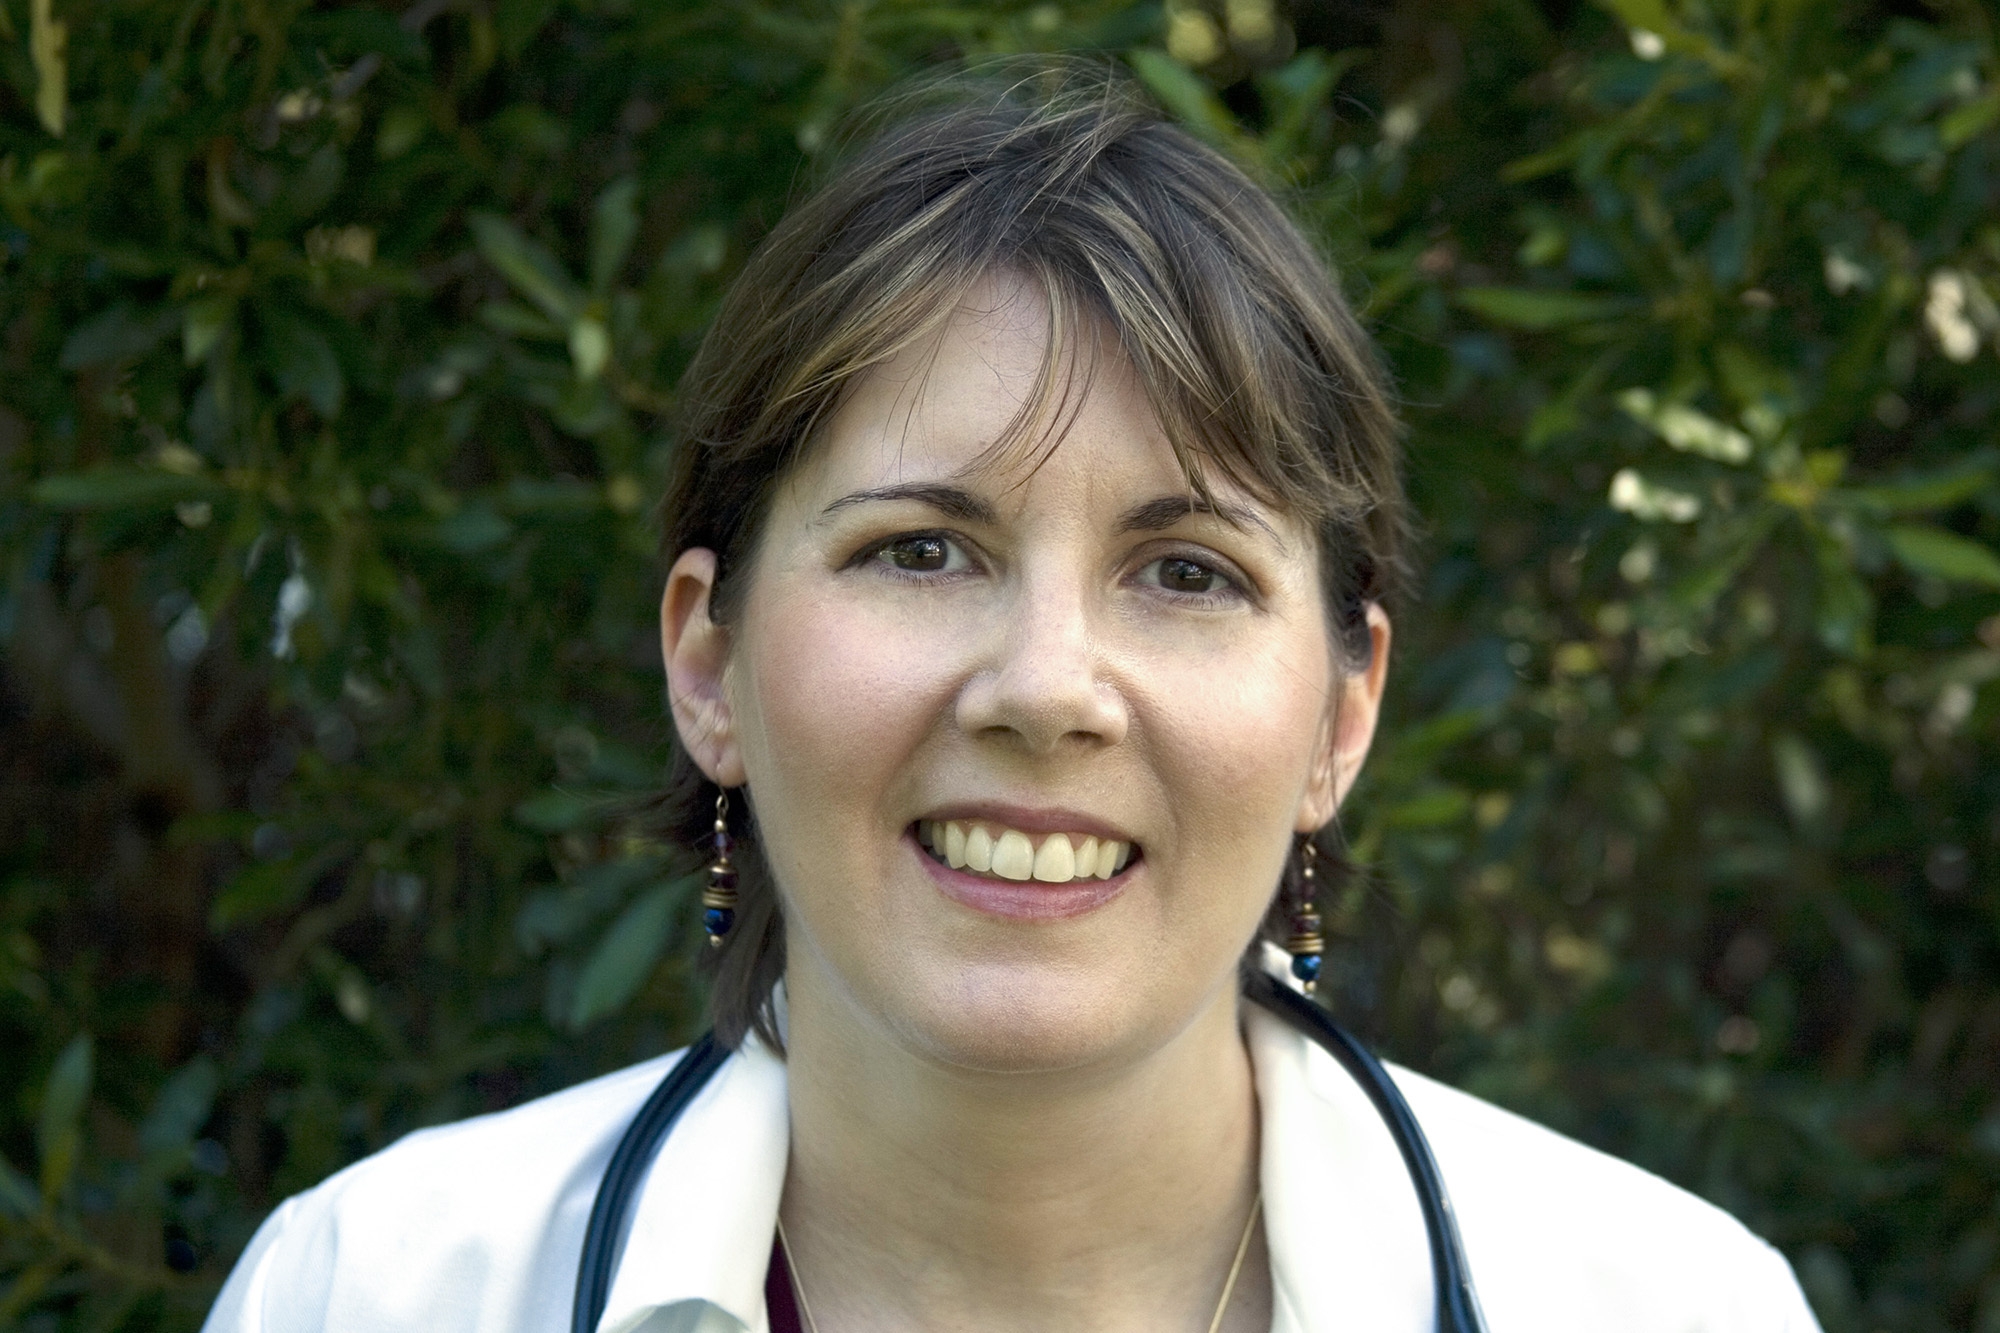 Amazon author CJ Lyons smiles into the camera. She has dark hair and is wearing a white jacket with a stethoscope around her neck. The background is blurred trees. 